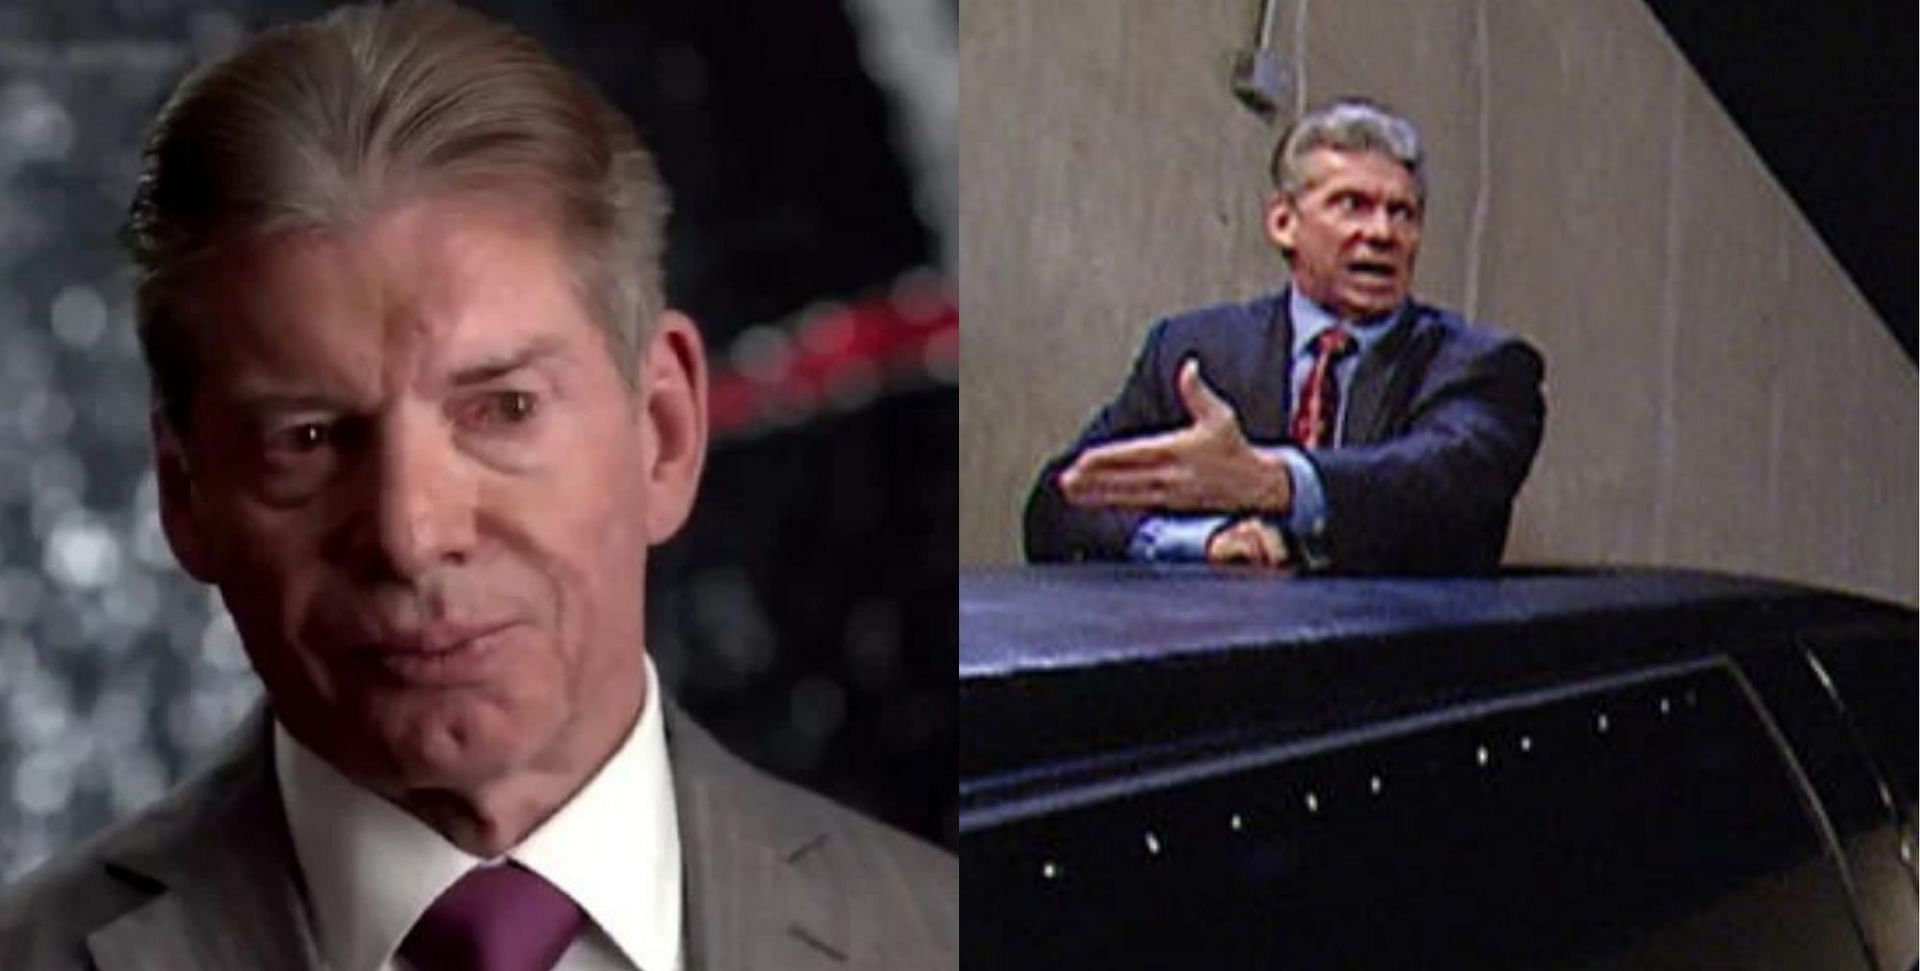 Vince McMahon found himself in a tough spot on the road when Road Dogg got injured